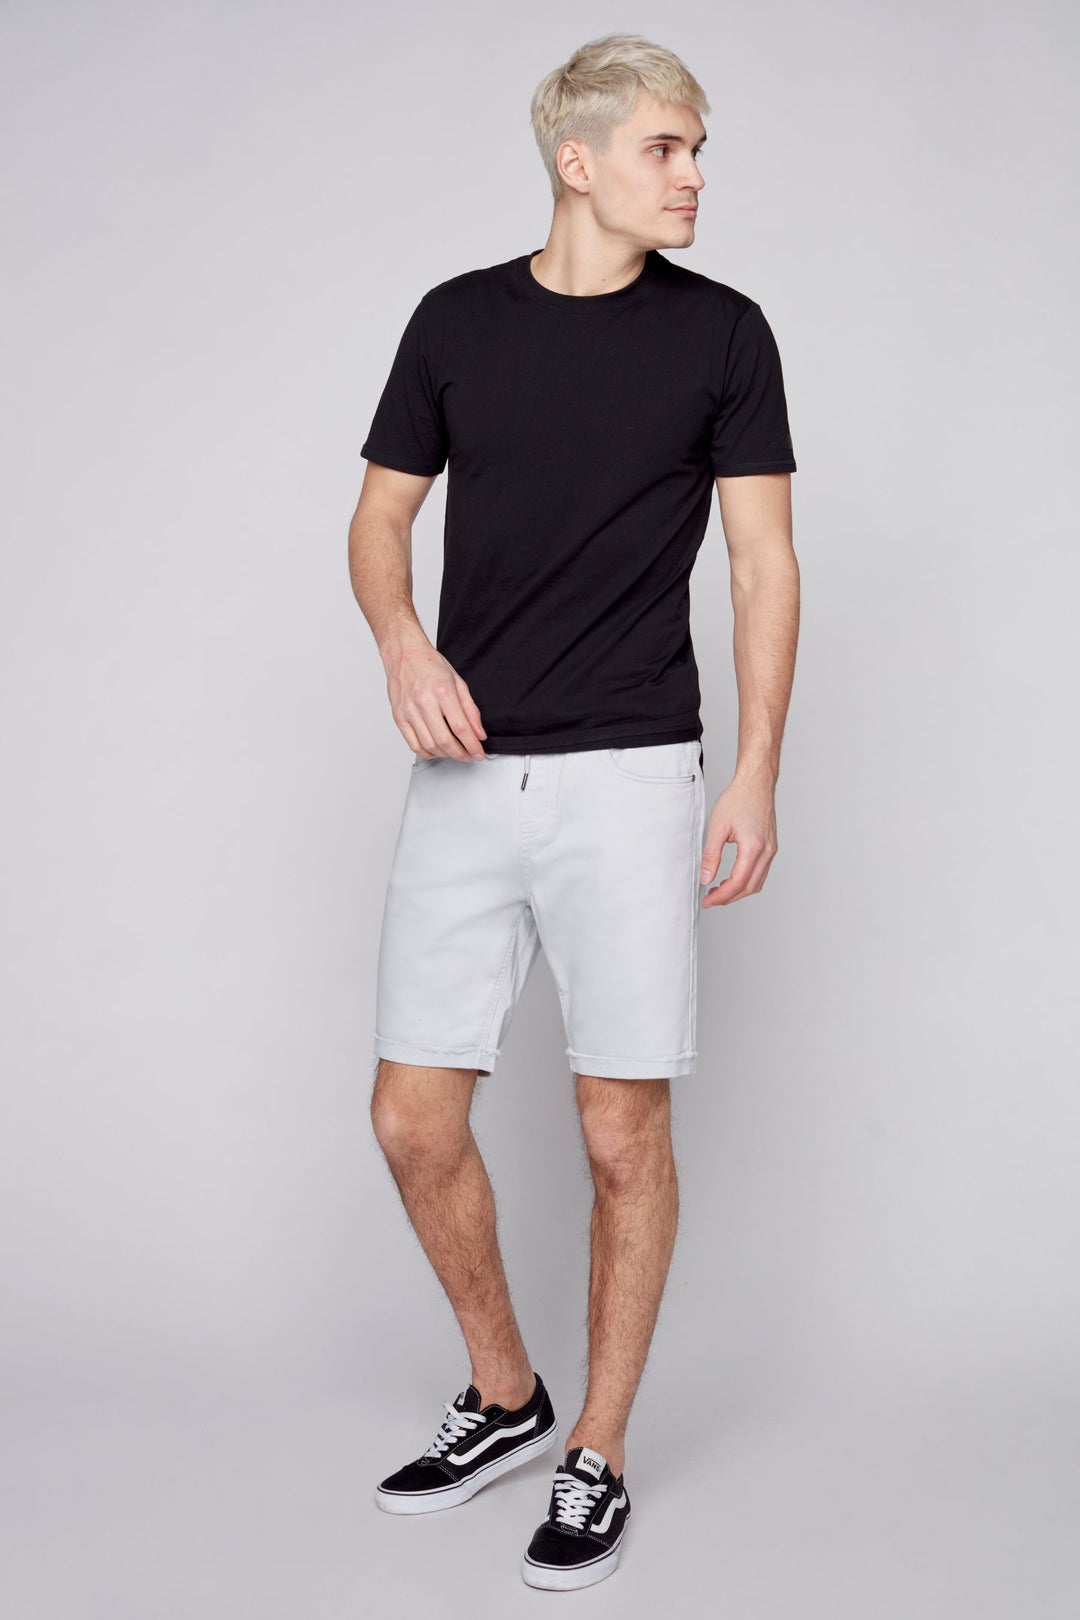 LENNON - Mens Rolled Up Shorts - Frost Blue